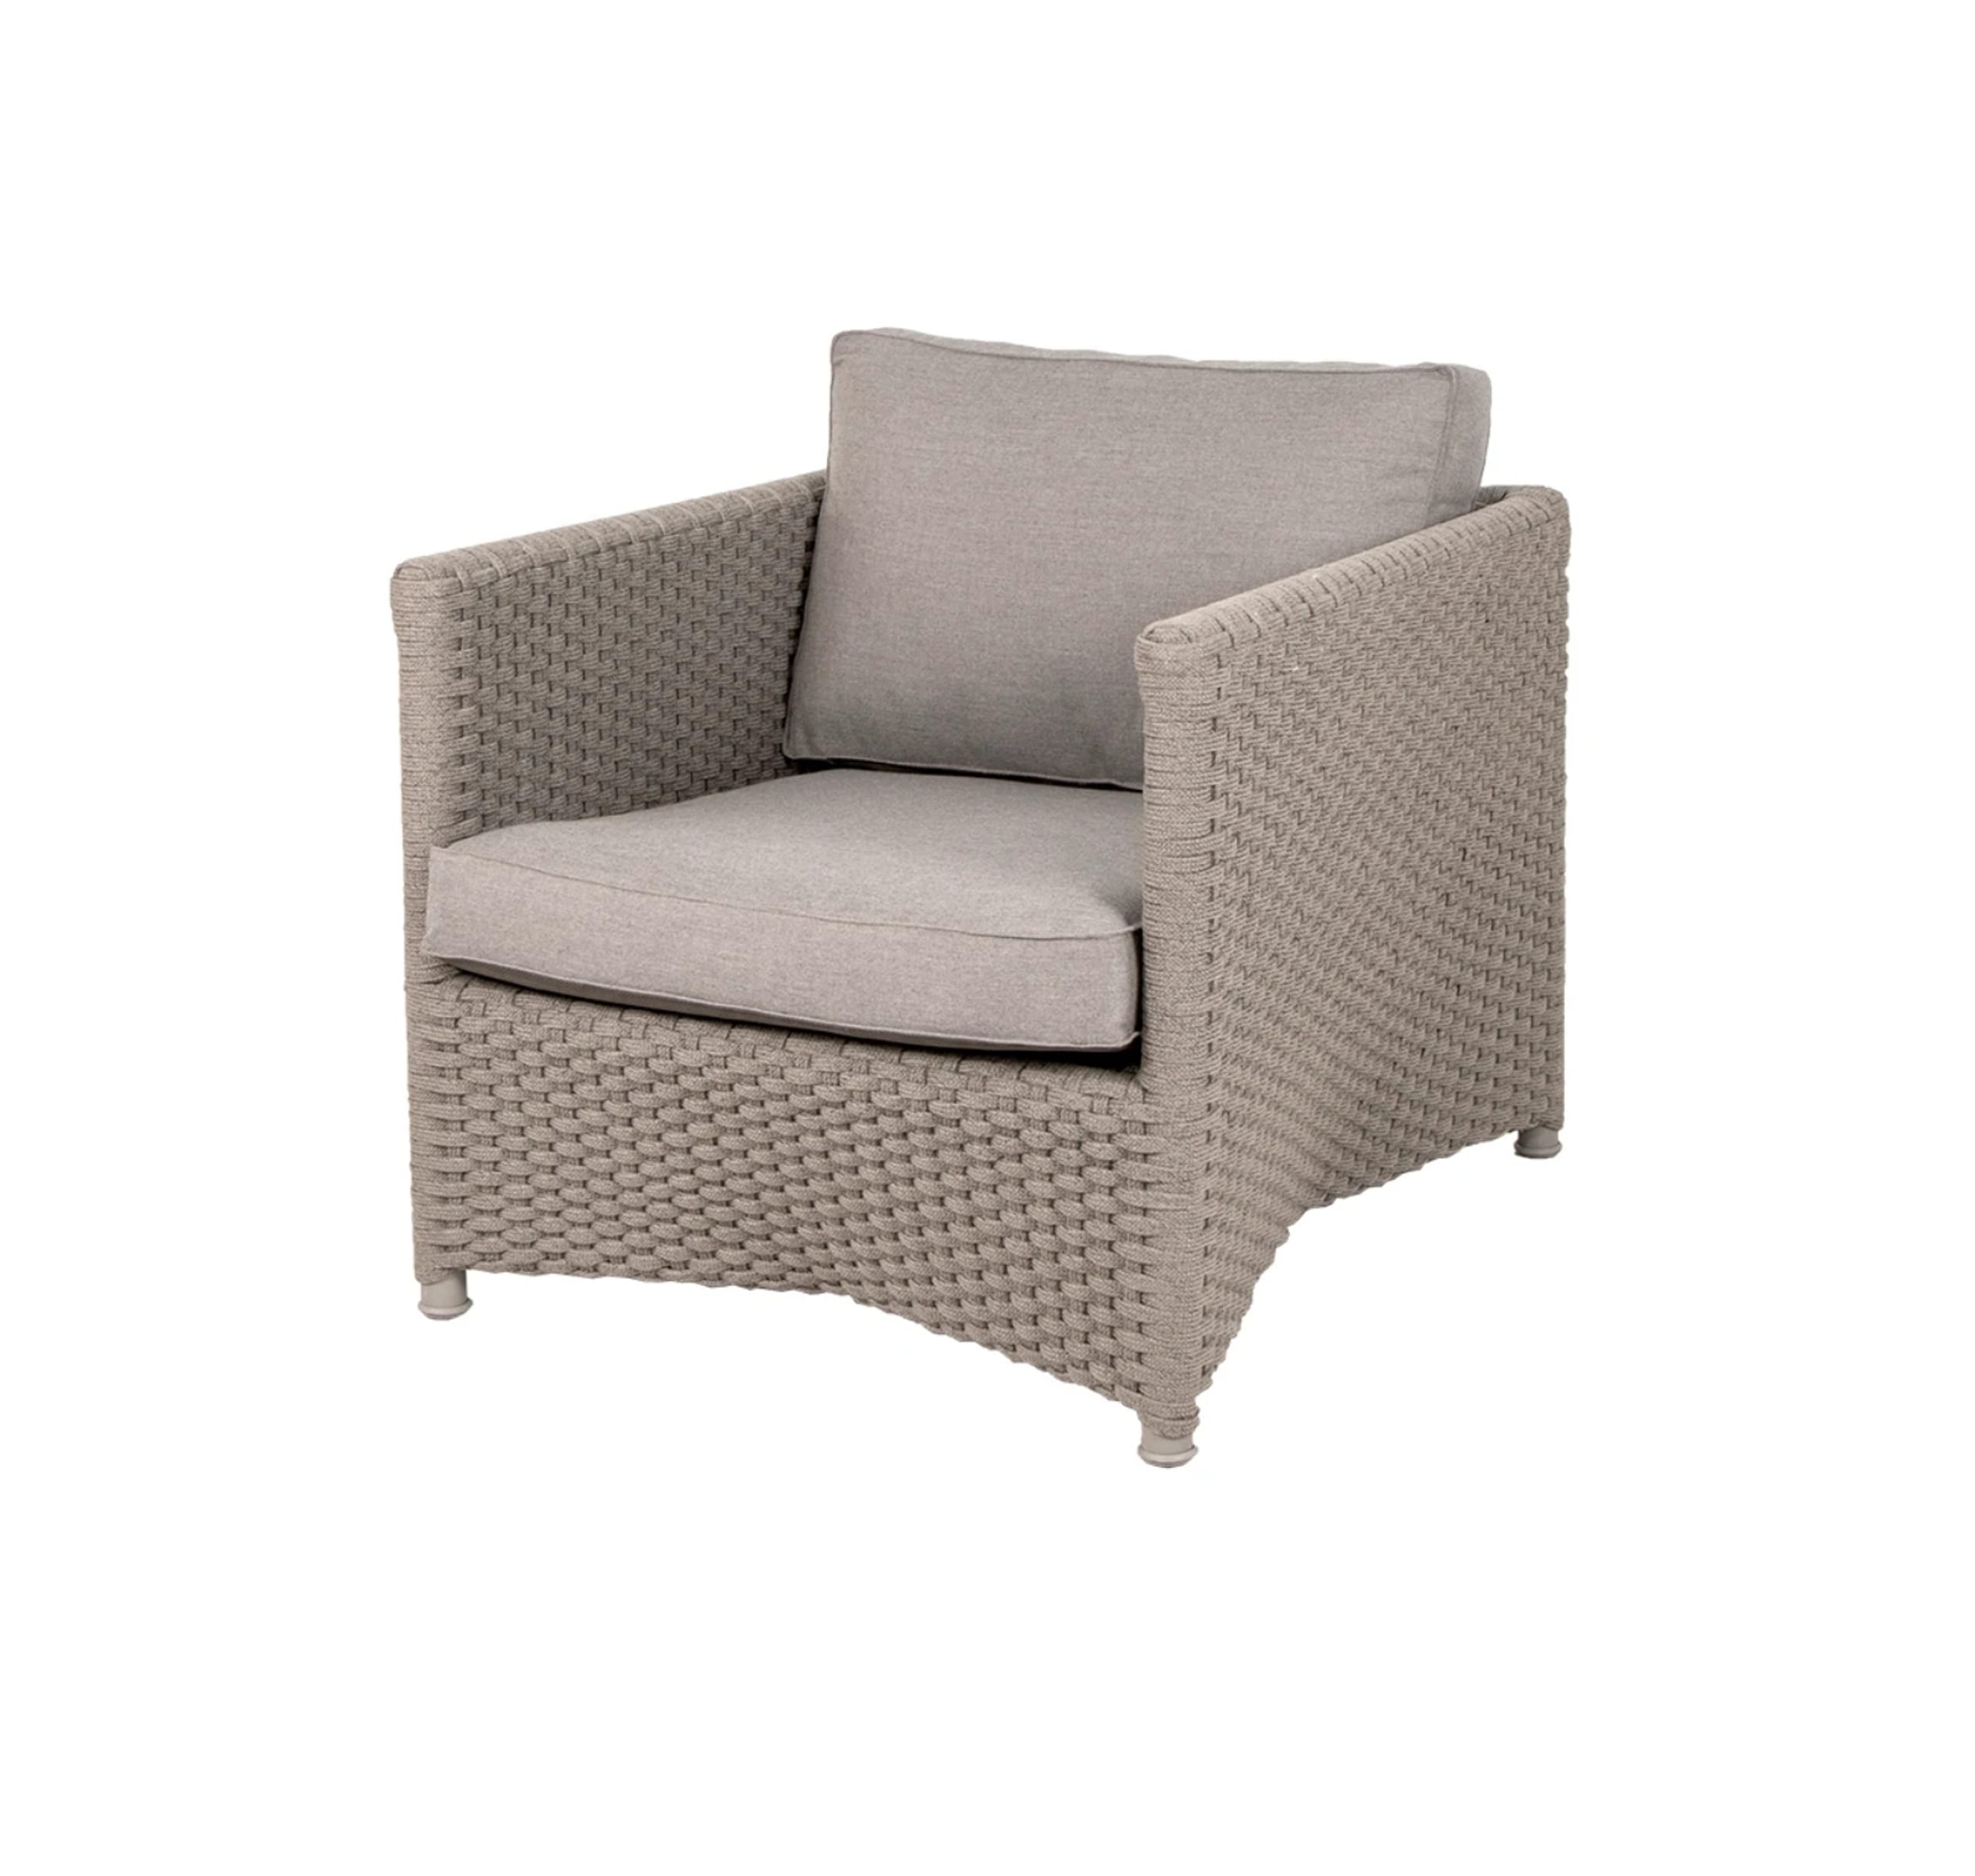 Cane-line - Chaise - Diamond lounge stol - Taupe, Cane line tex ramme